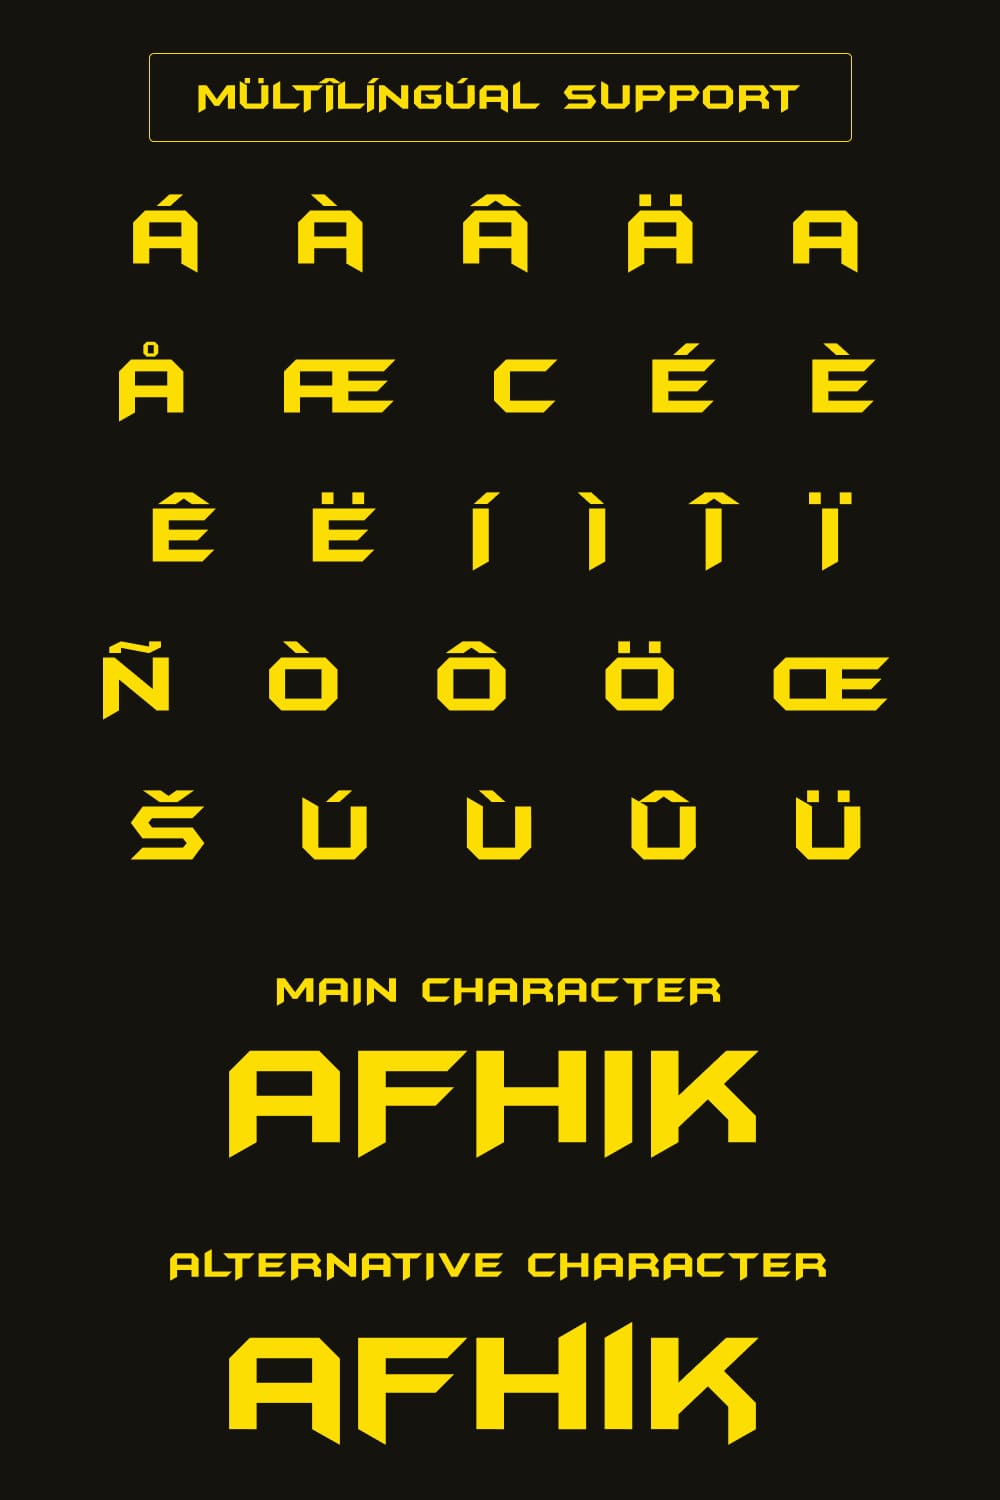 The bright yellow font on a black background creates a wonderful contrast.